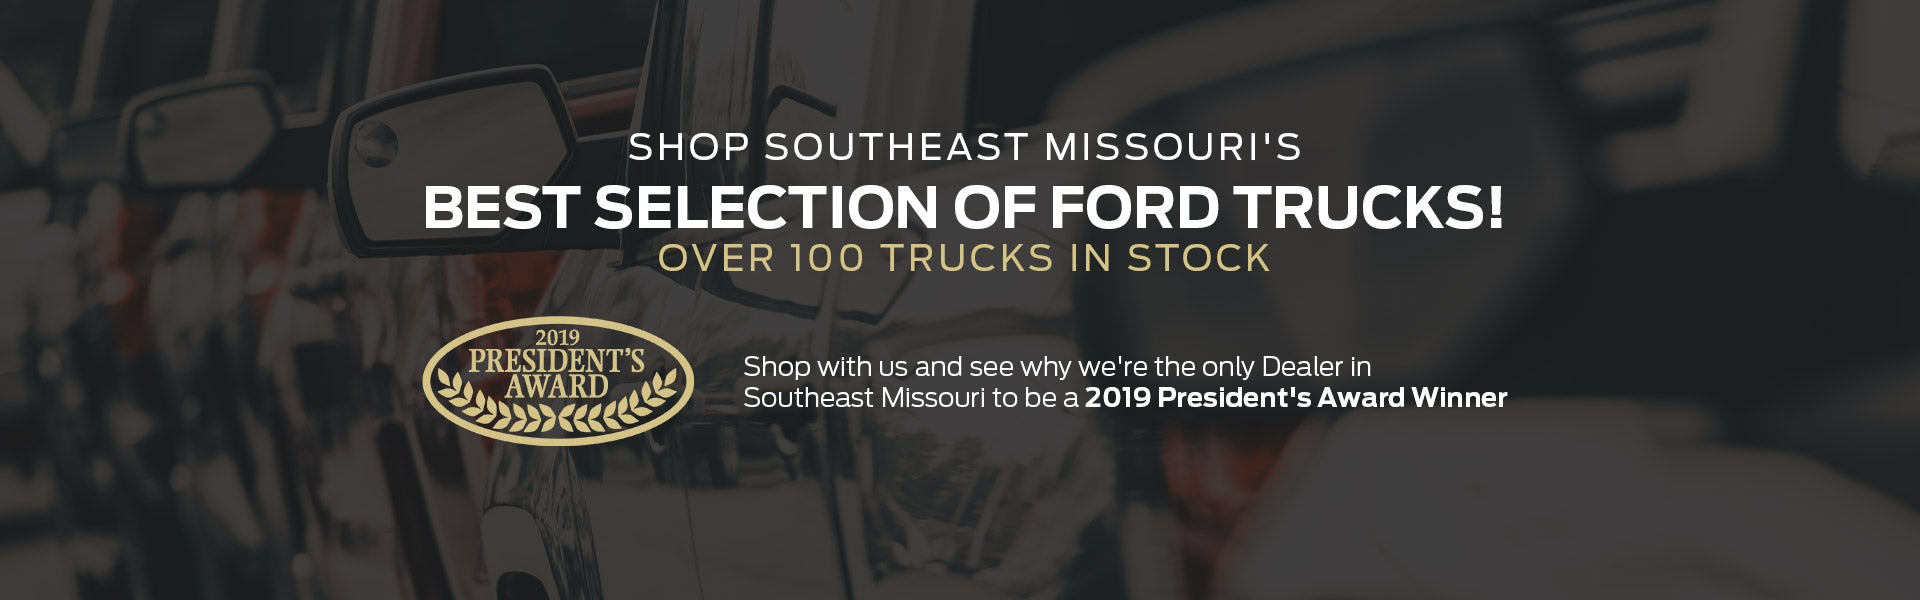 Best Ford Truck Selection